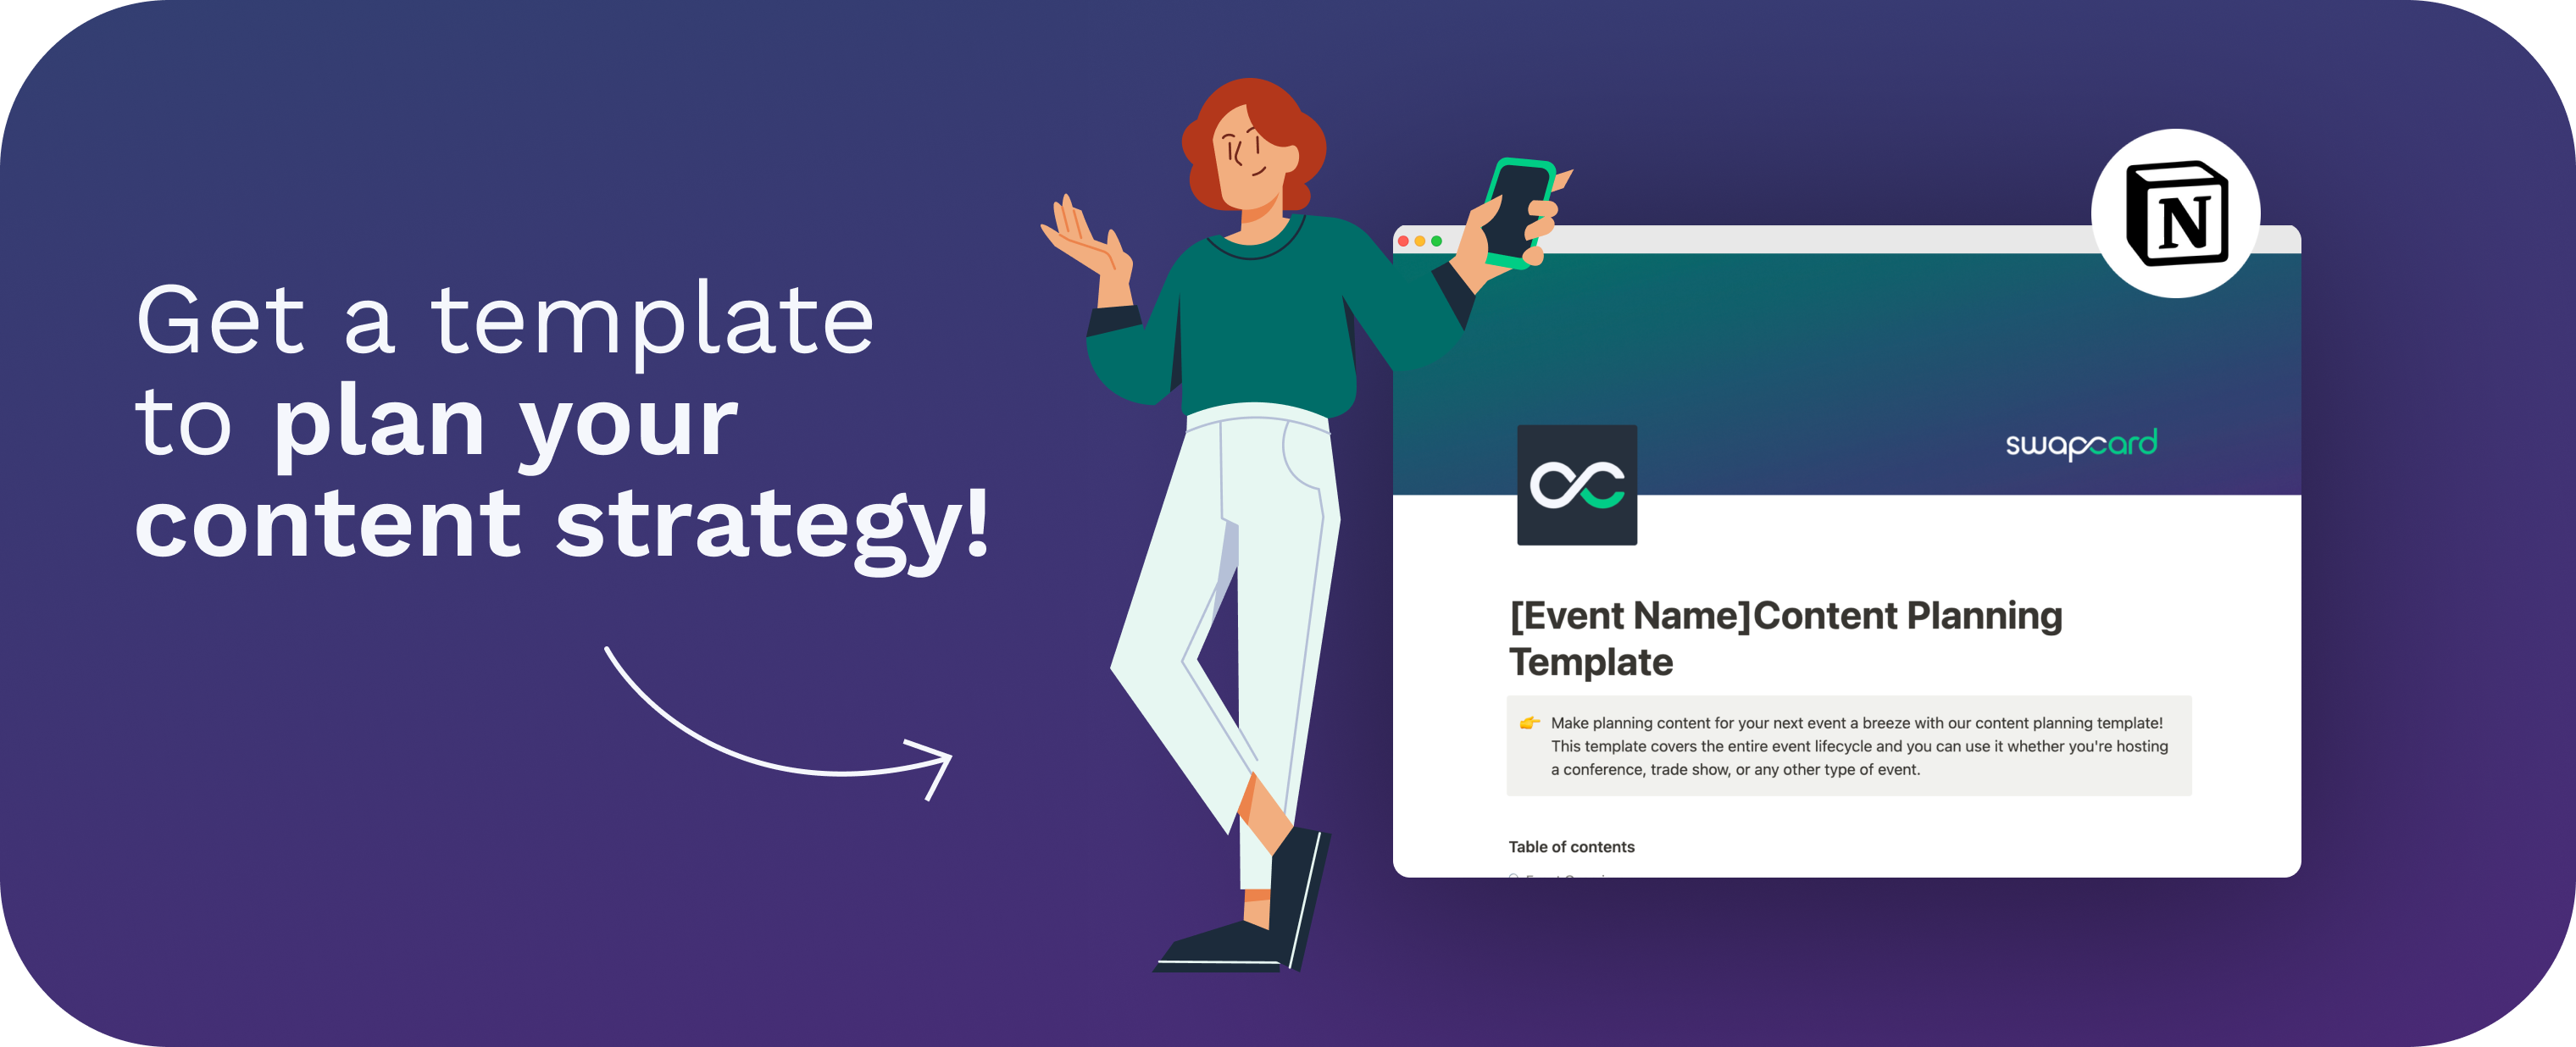 Swapcard_Event-Content-Repurposing_Meme_creating-engaging-event-content_Notion-page-template-Plan-your-strategy